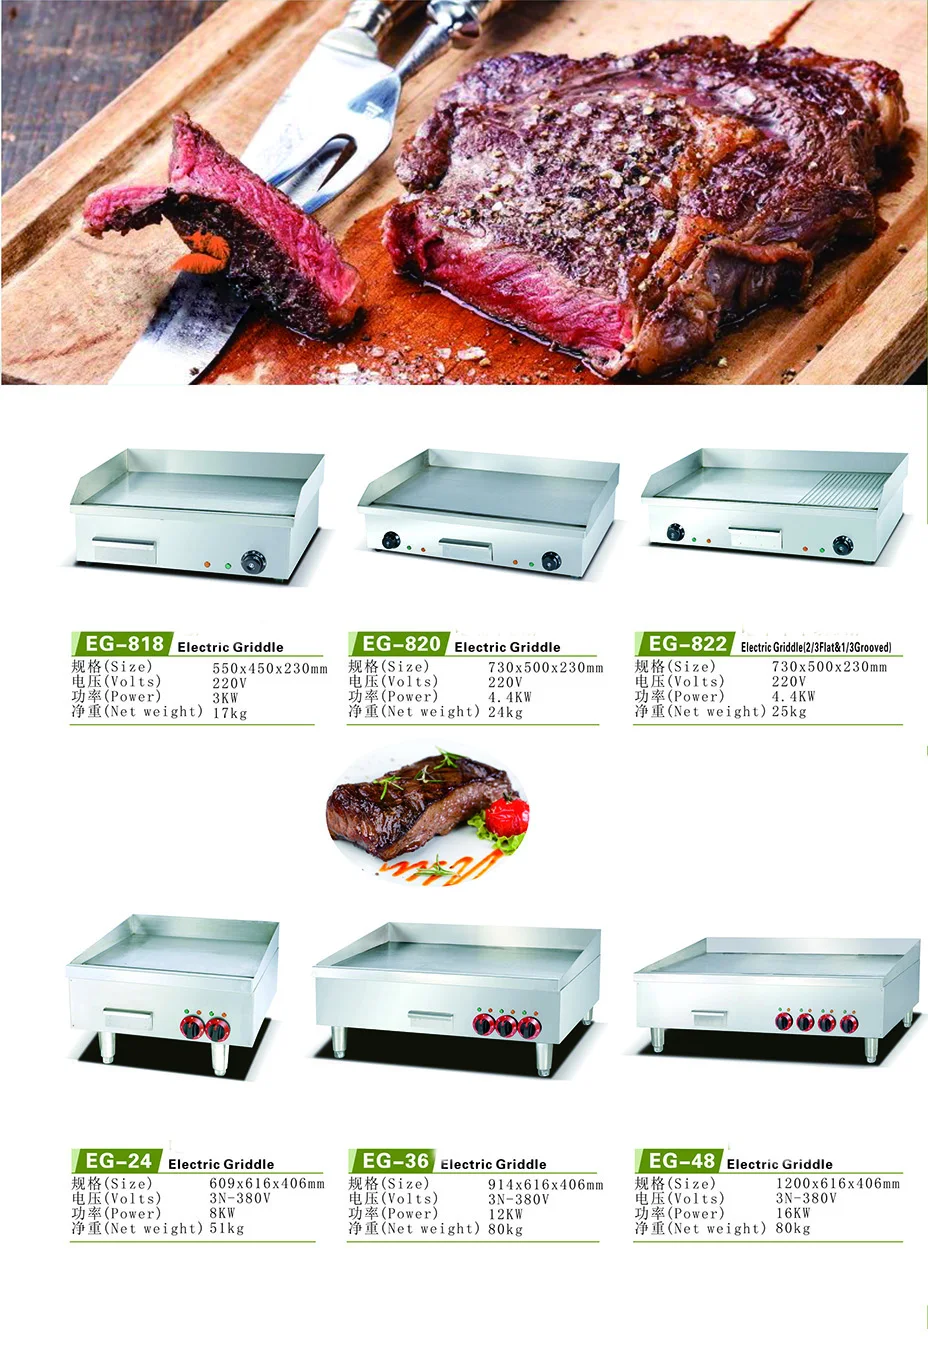 IS-ET-K122-B 3-Head Environmental Roaster Gas Steel Grill Barbecue With Glass Steel Plate Cover Fire Board